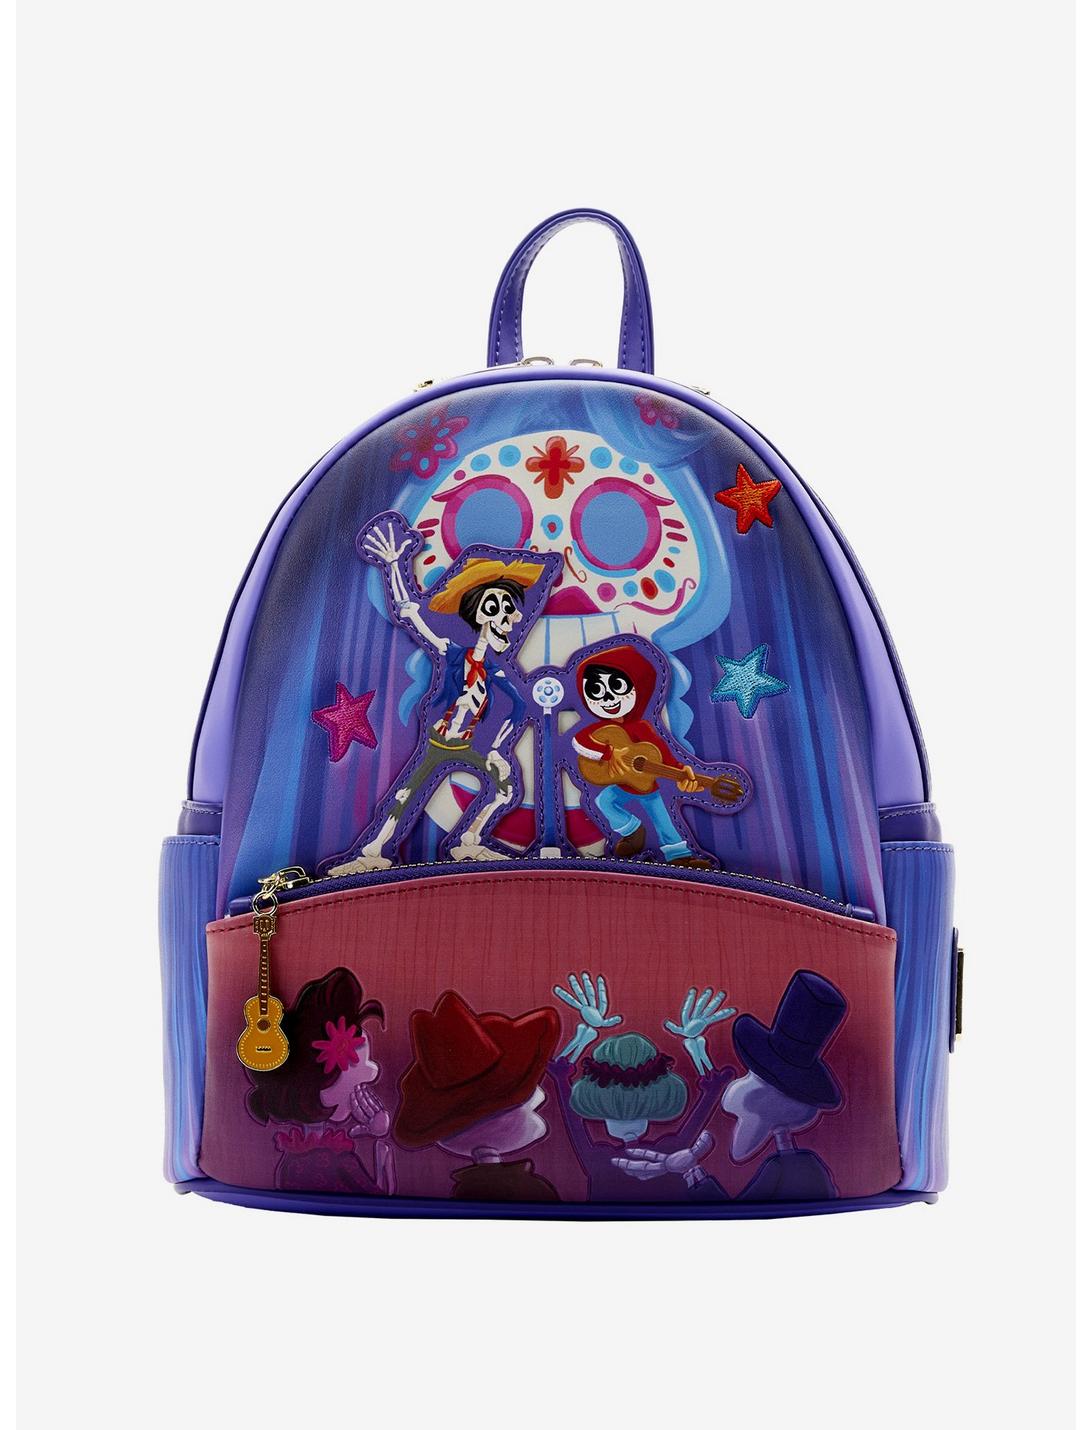 Loungefly - This Coco mini backpack is making us un poco loco! 🏵💀🏵What  part from Coco will you remember forever? You can find this beautiful gem  exclusively at  #Loungefly #Disney #Pixar #